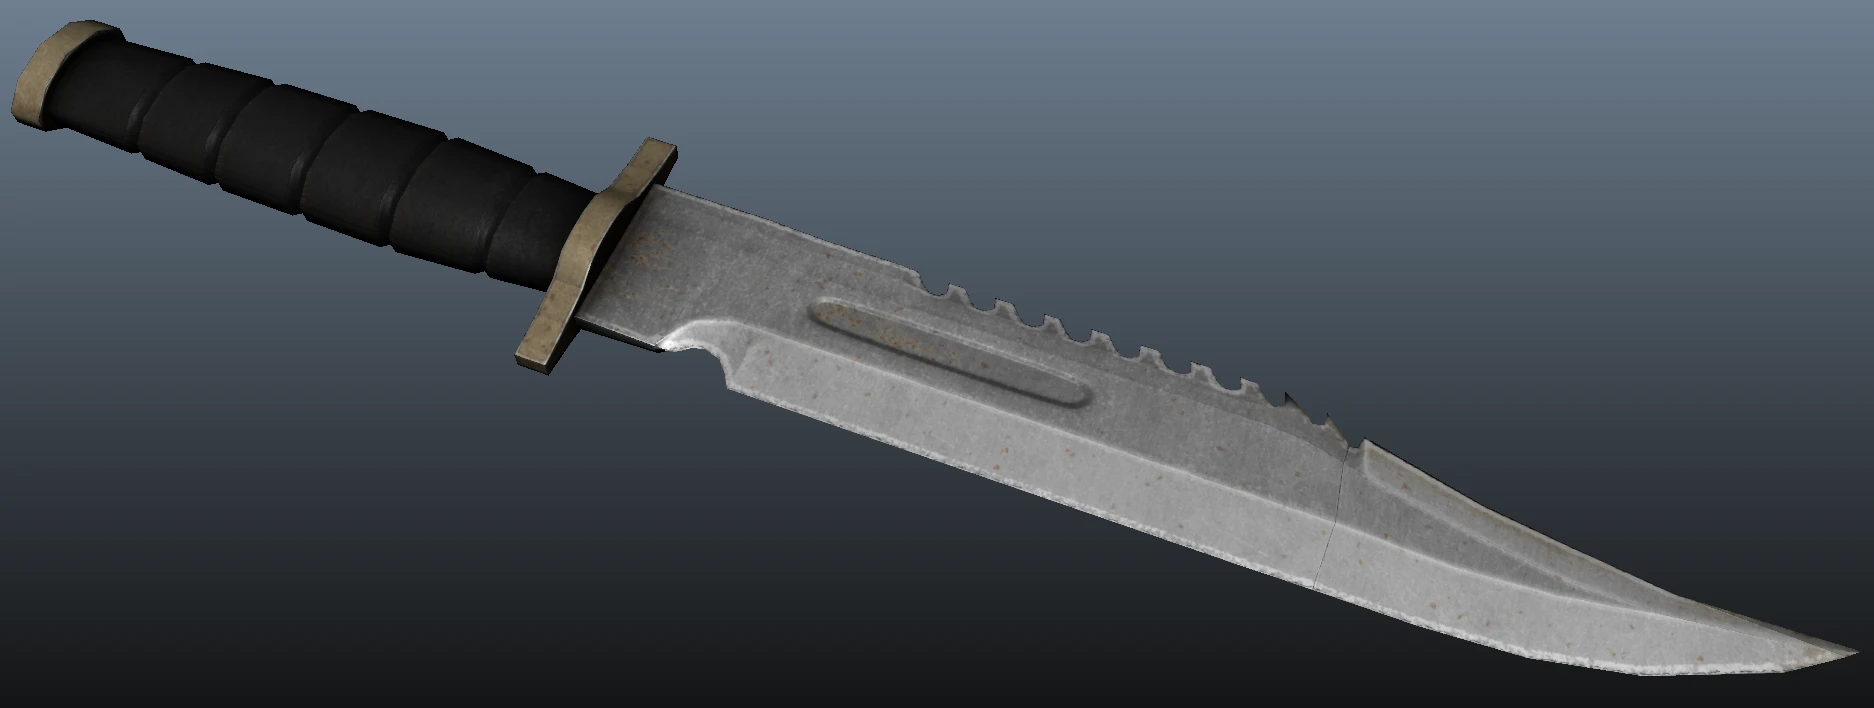 Combat knives in fallout new vegas